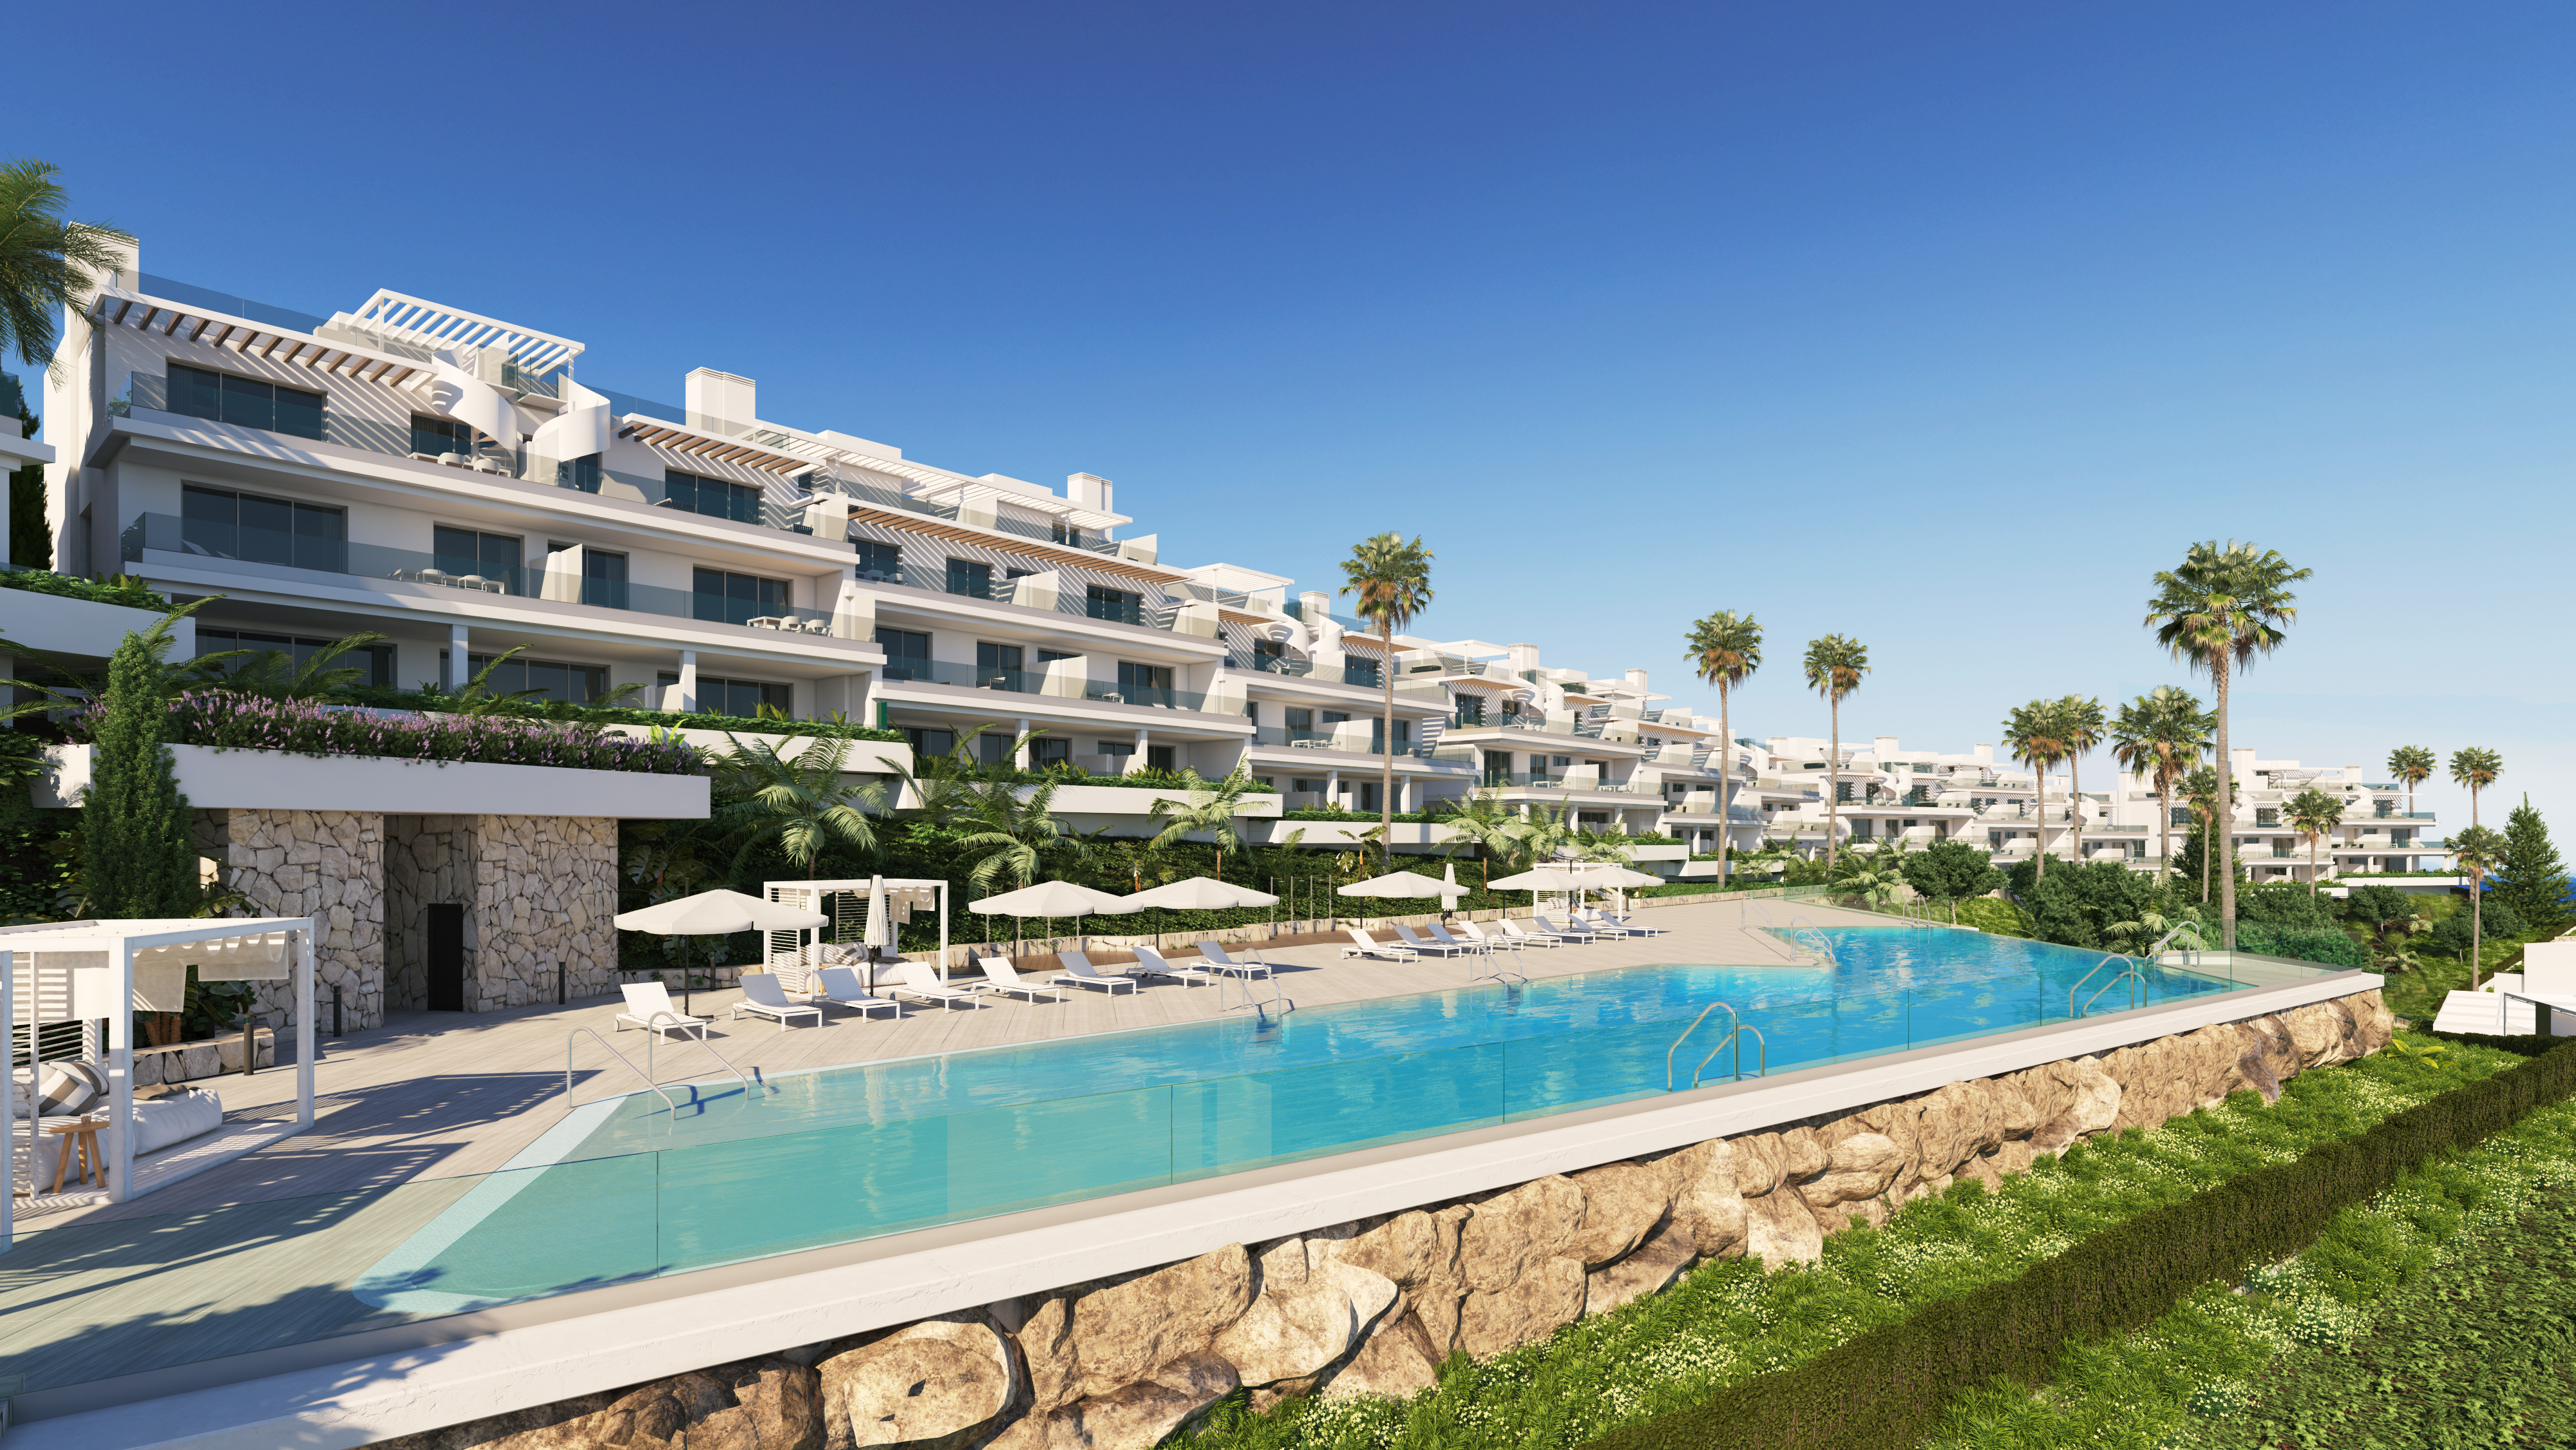 Apartments with sea views on the Golden Mile of Estepona